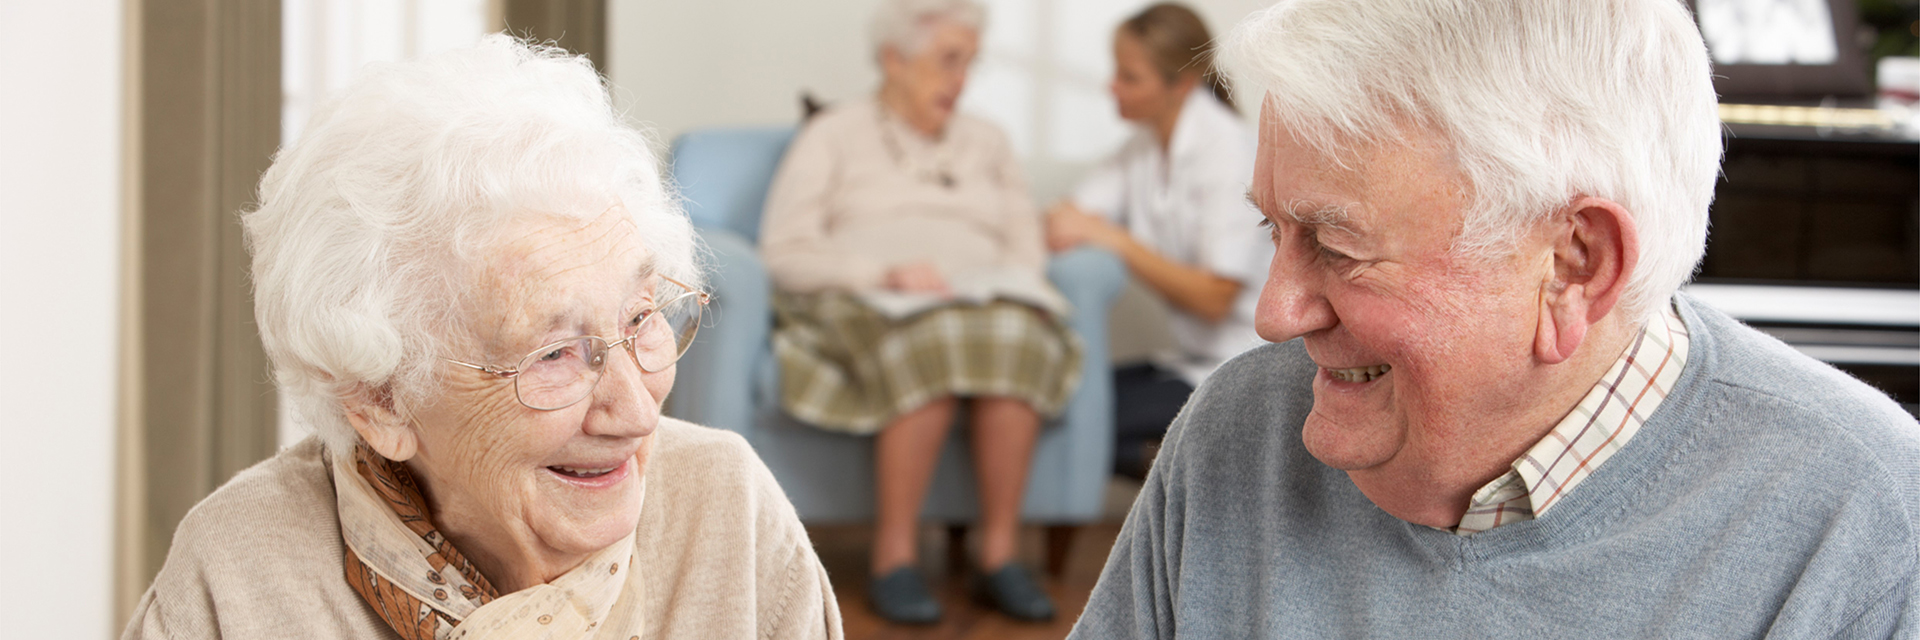 elderly couple smiling with patient in background